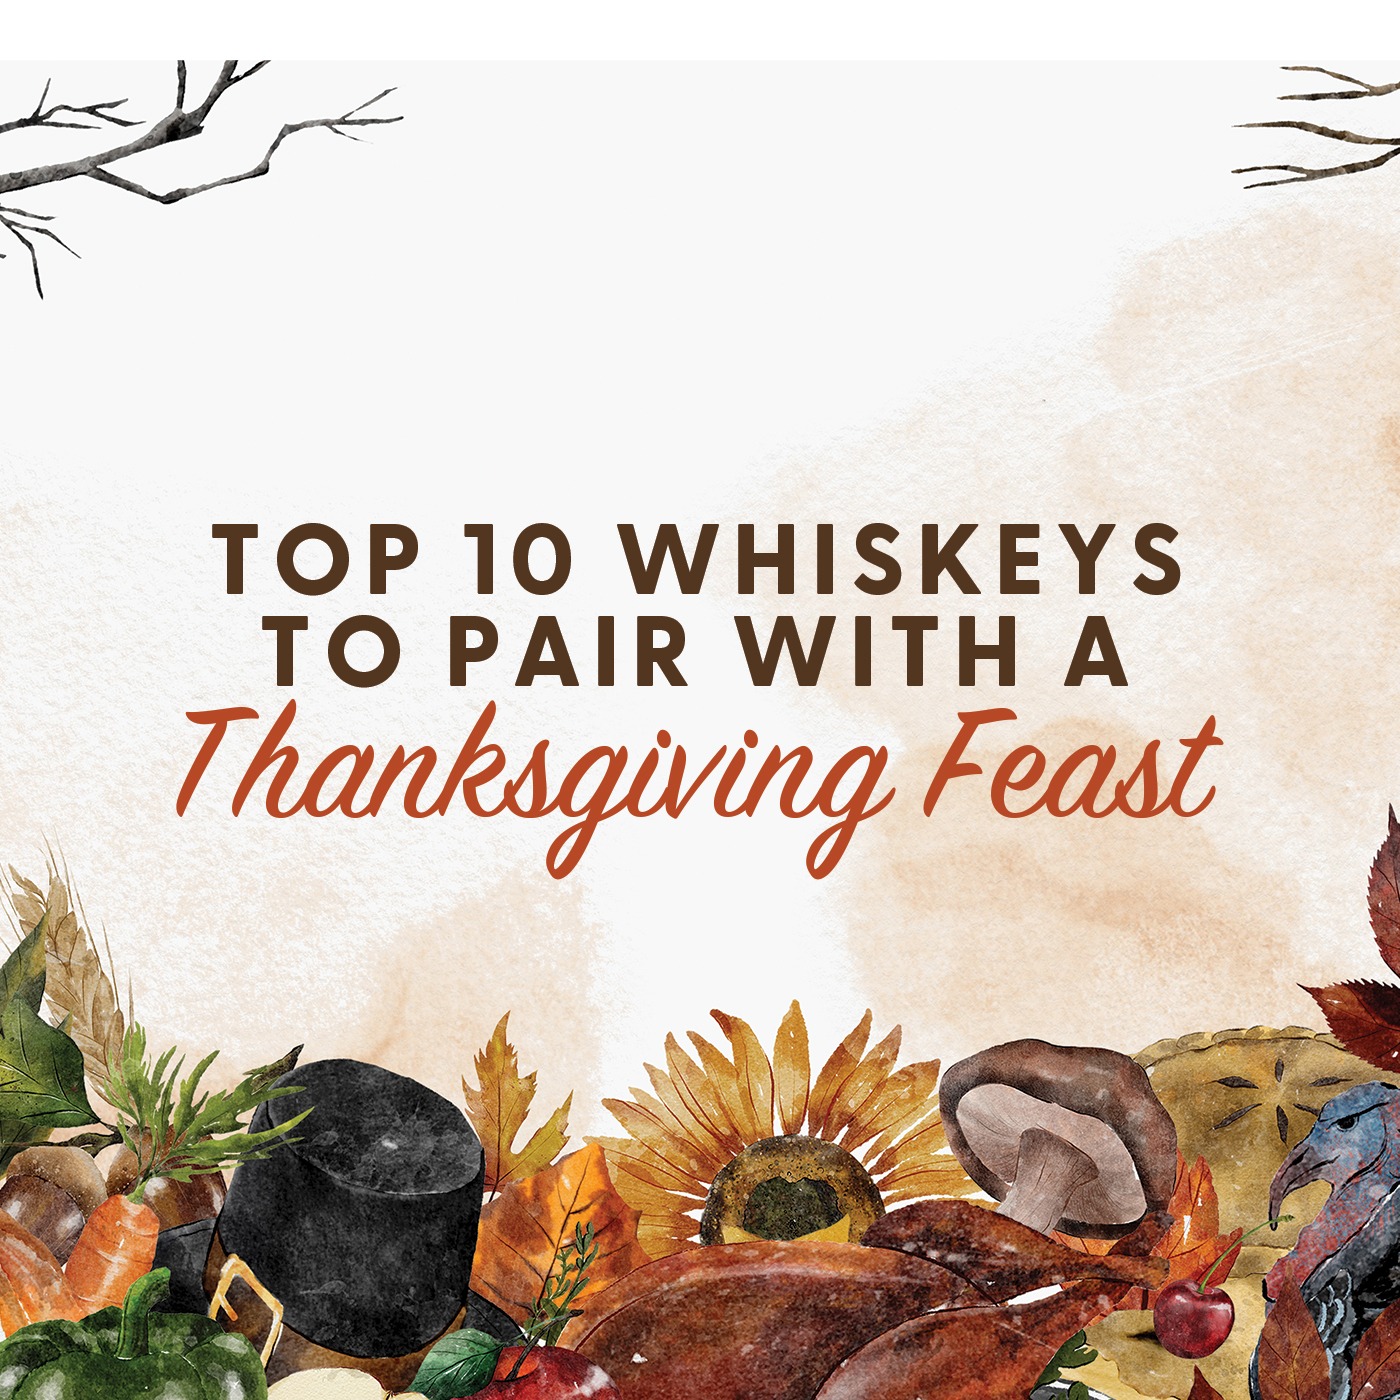 Top 10 Whiskeys to Pair With a Thanksgiving Feast